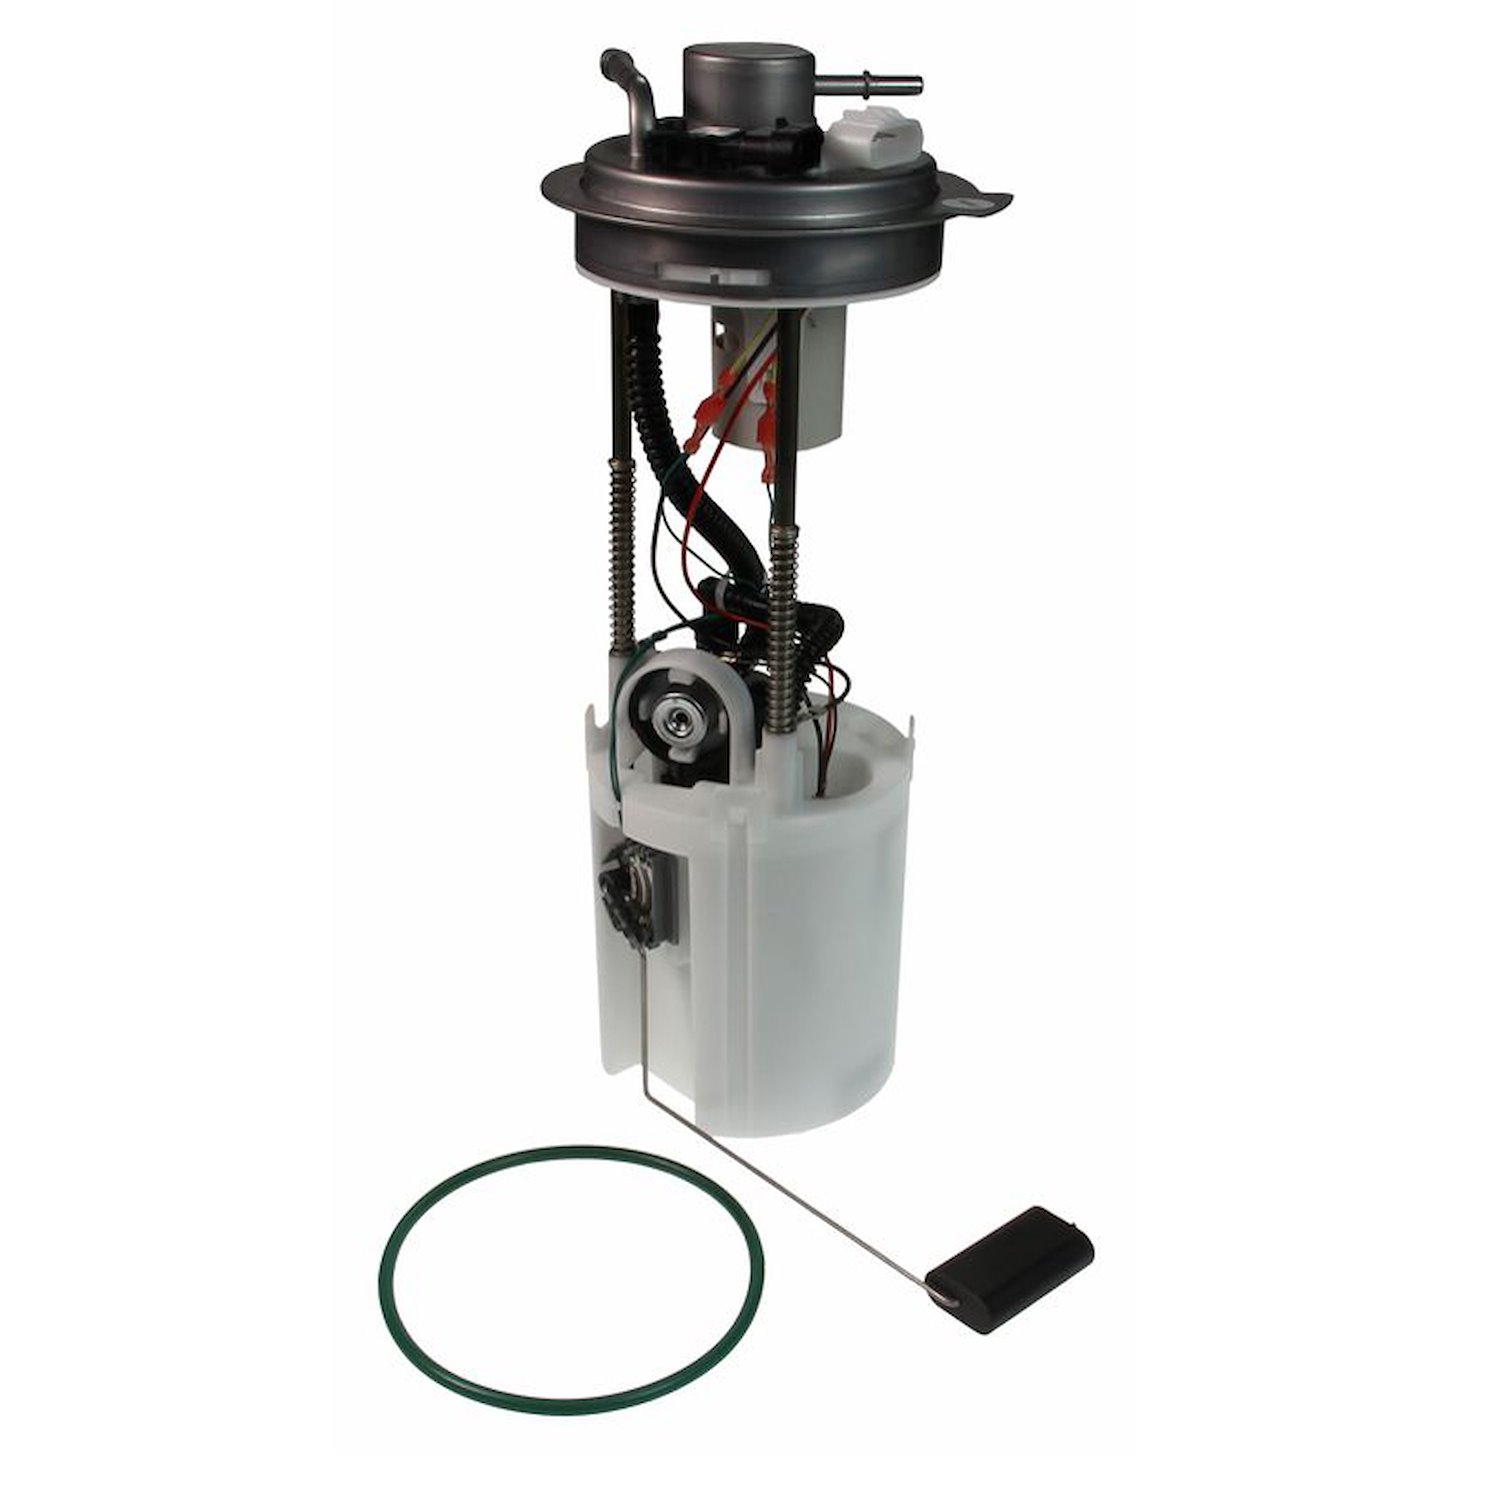 OE GM Replacement Electric Fuel Pump Module Assembly for 2004-2006 Chevy Silverado/GMC Sierra 1500